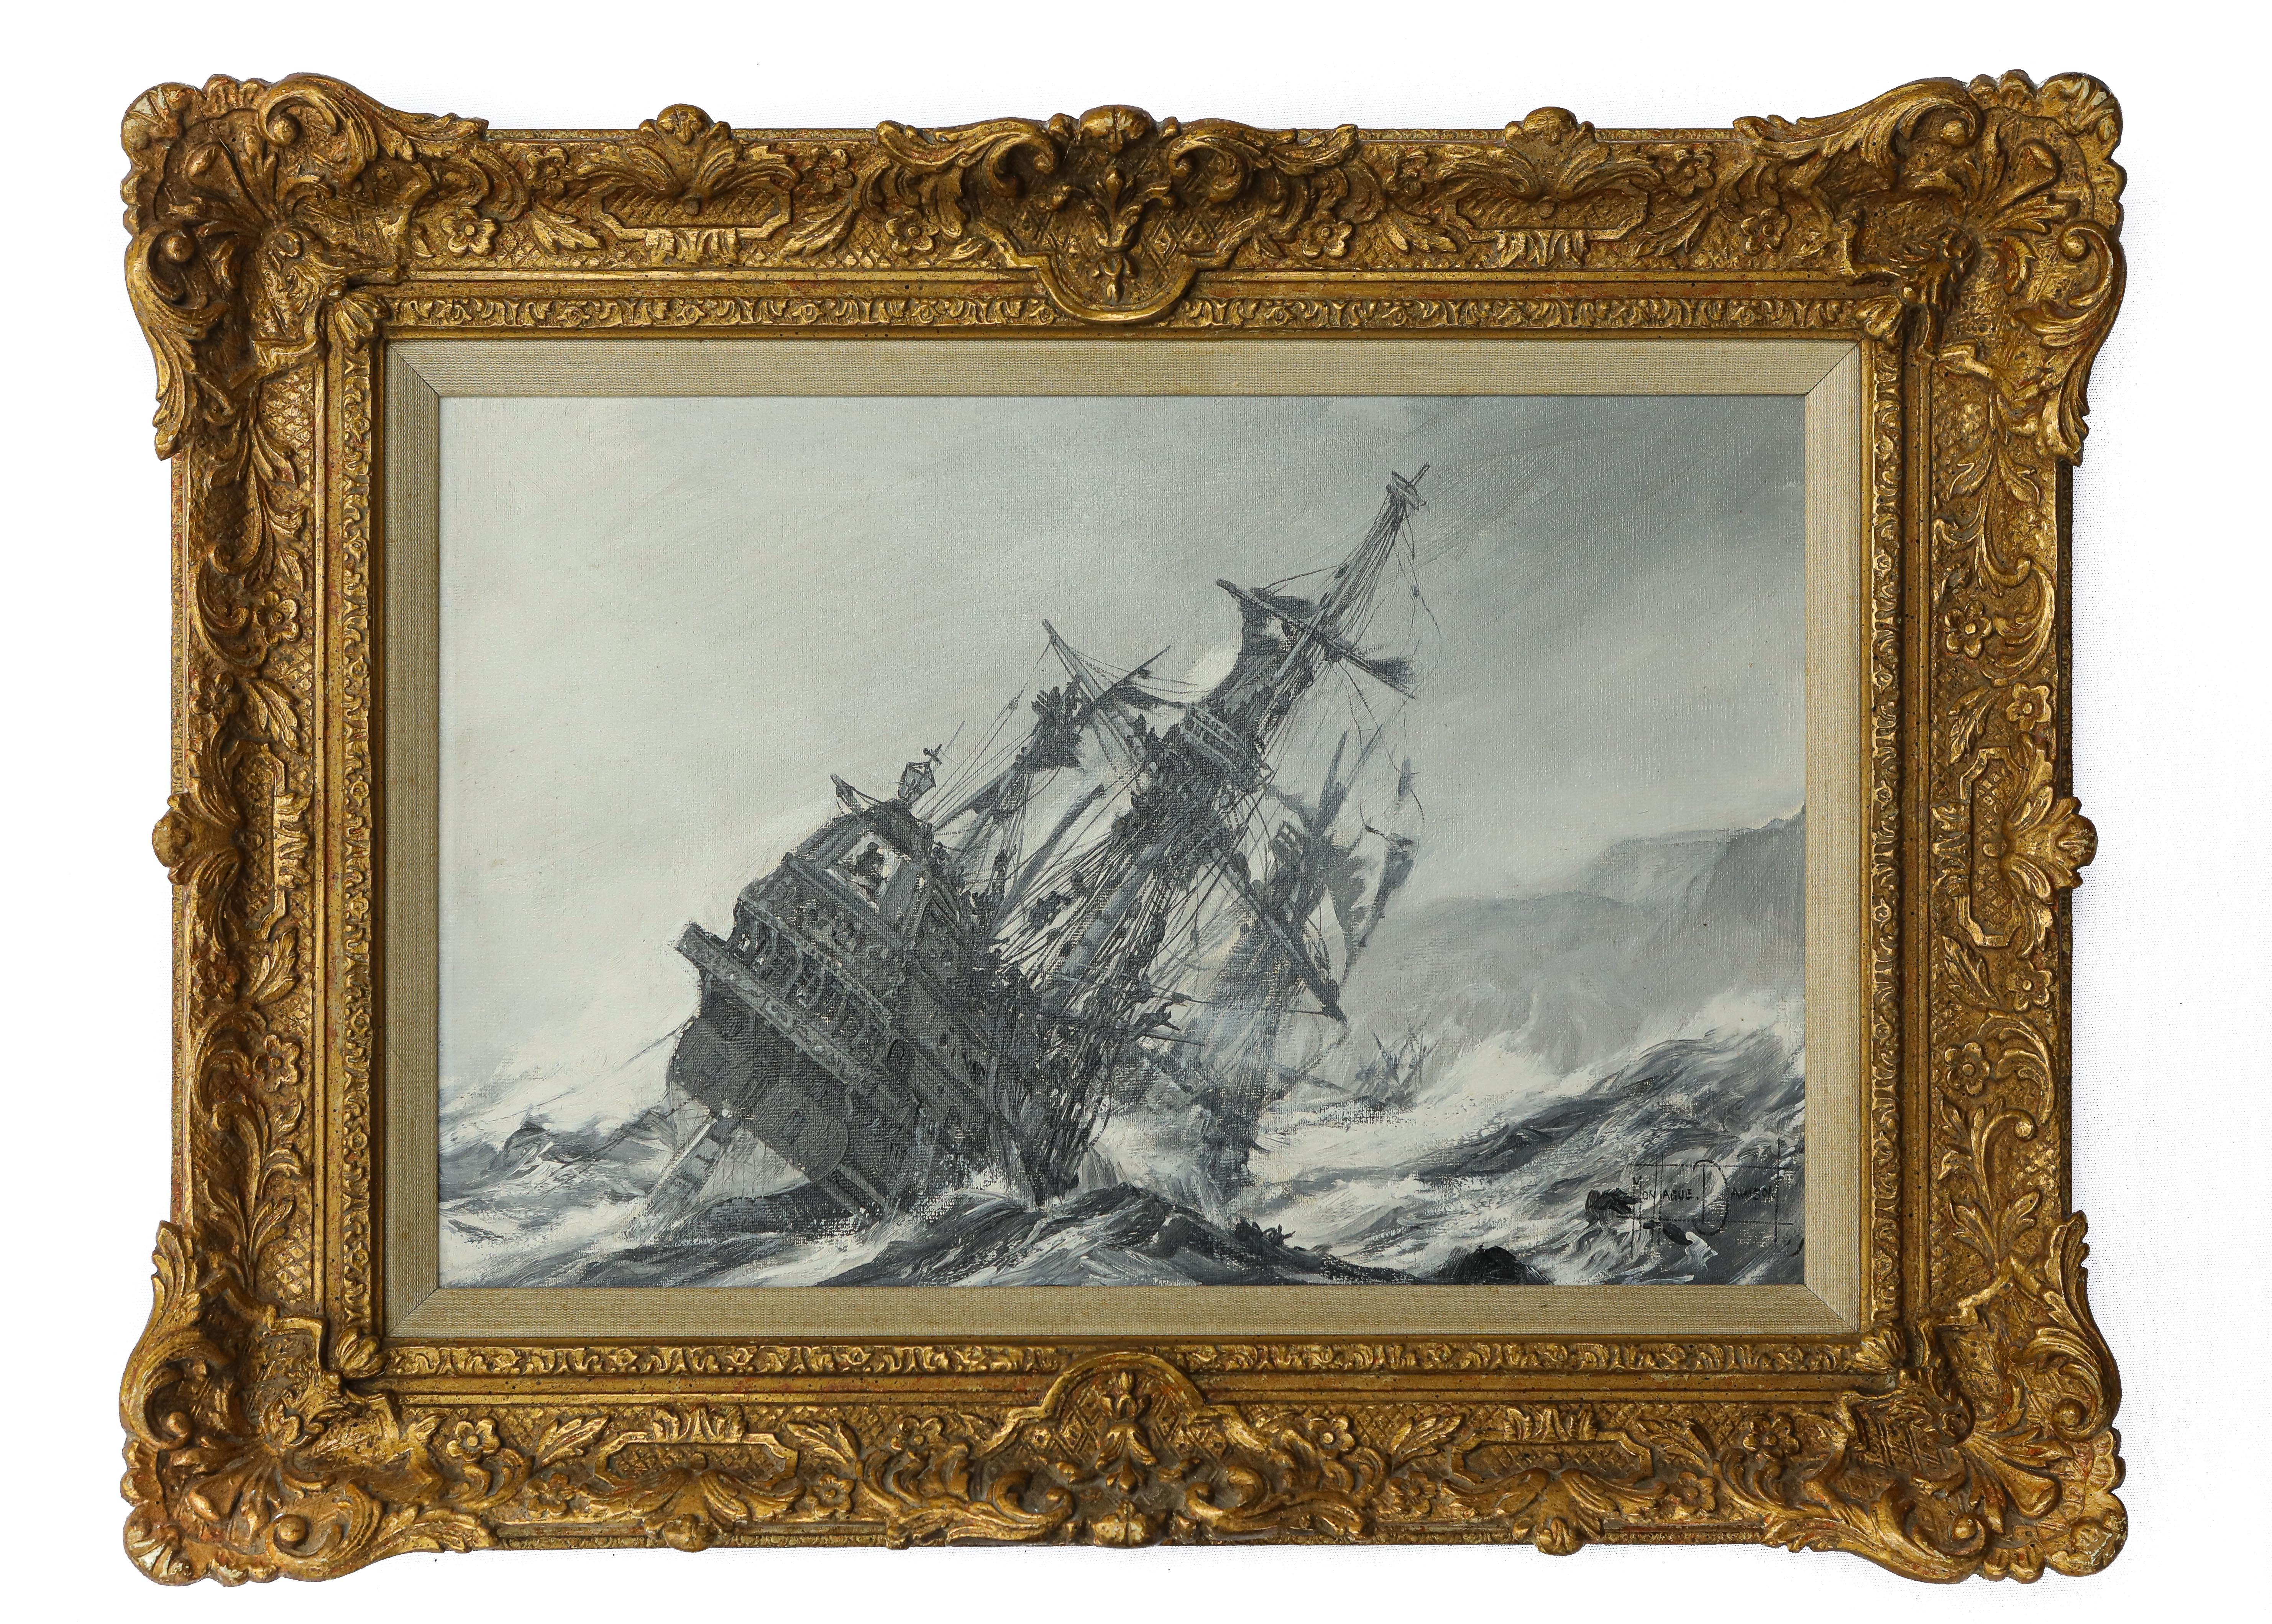 ‘A Galleon in Distress’ by Montague Dawson, a grisaille oil on canvas showing a galleon on port tack in grave danger of being wrecked on a rocky lee shore, with shredded sails and waves threatening to scupper her through her open gun ports, in the